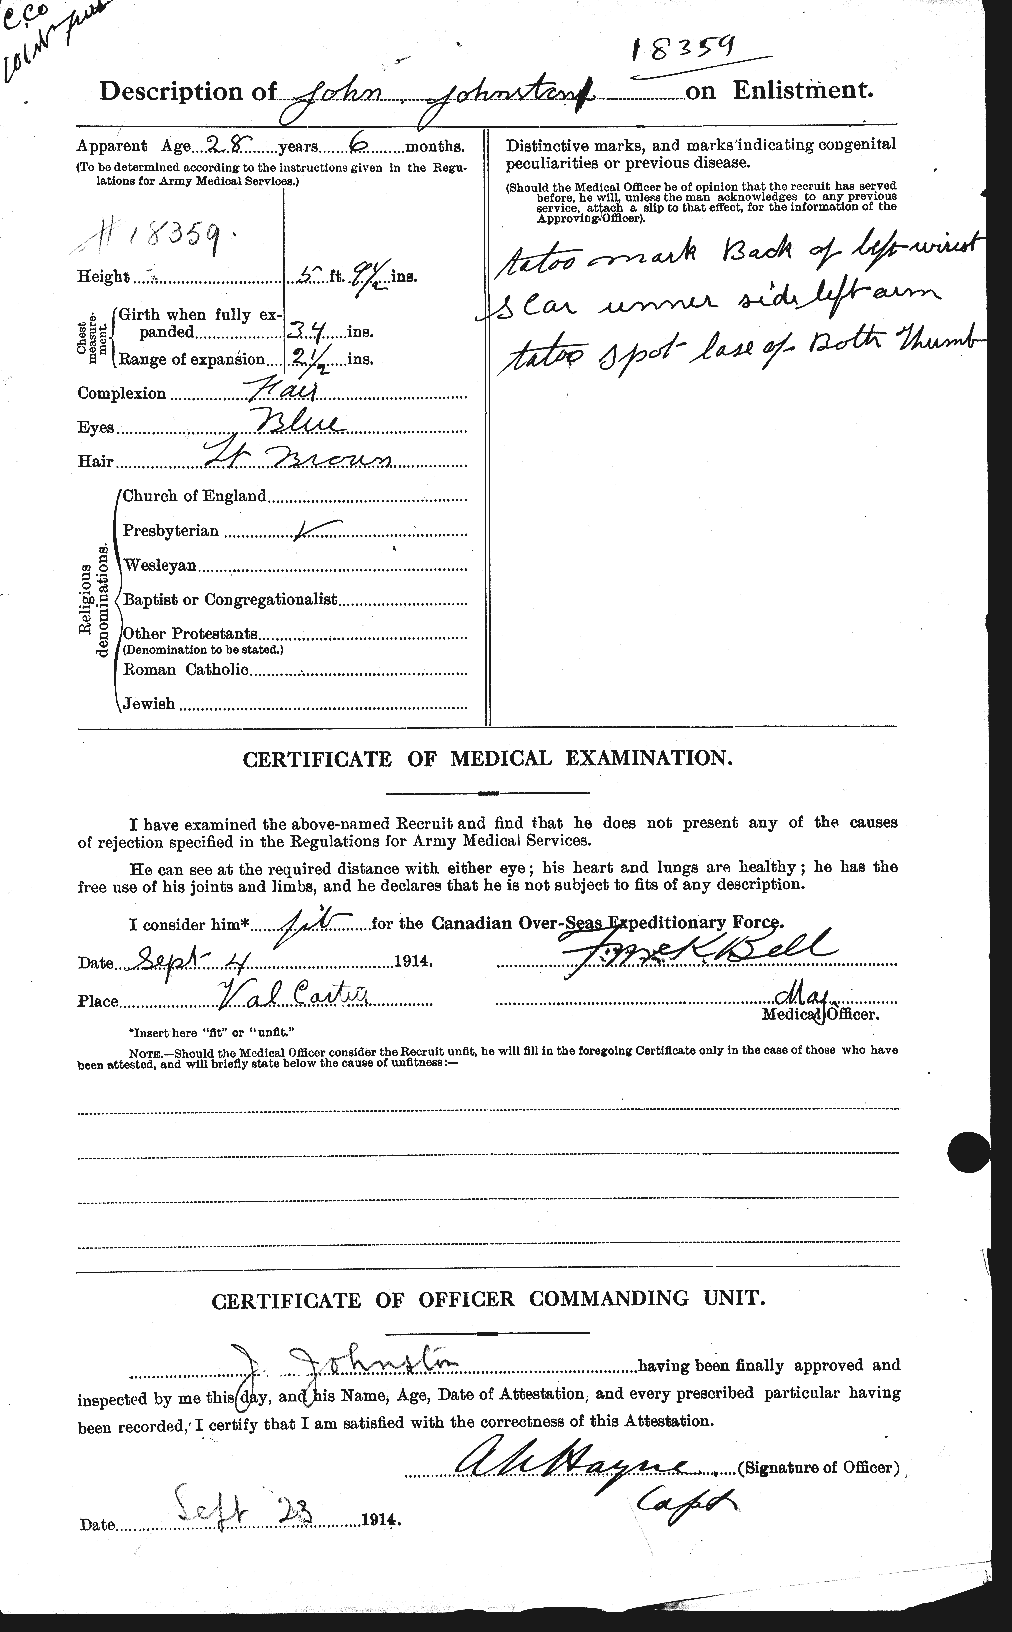 Personnel Records of the First World War - CEF 422795b